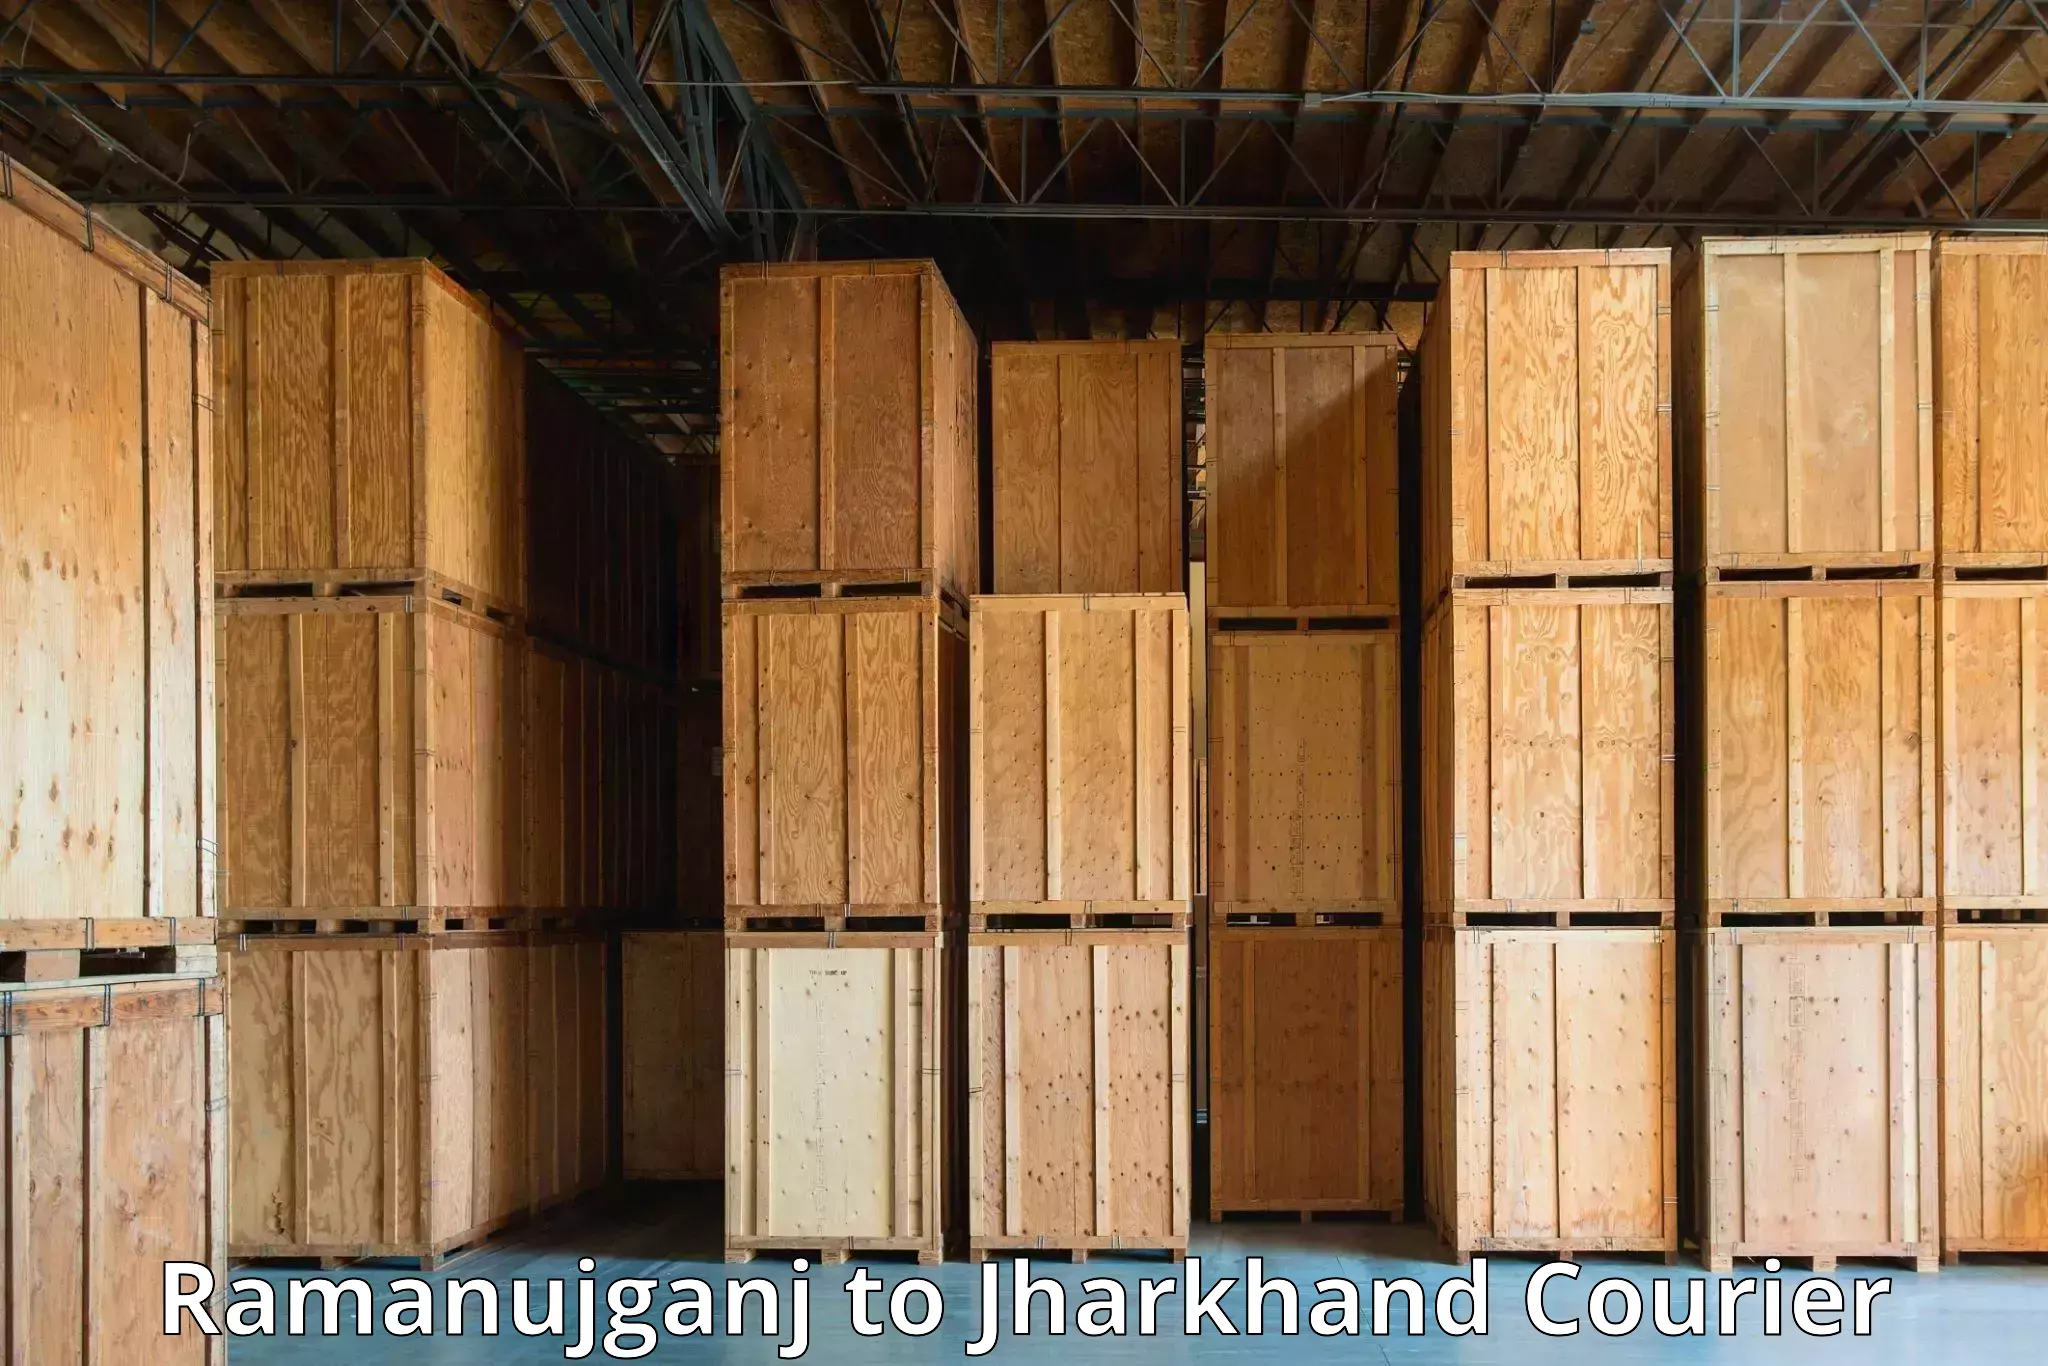 State-of-the-art courier technology Ramanujganj to Jharkhand